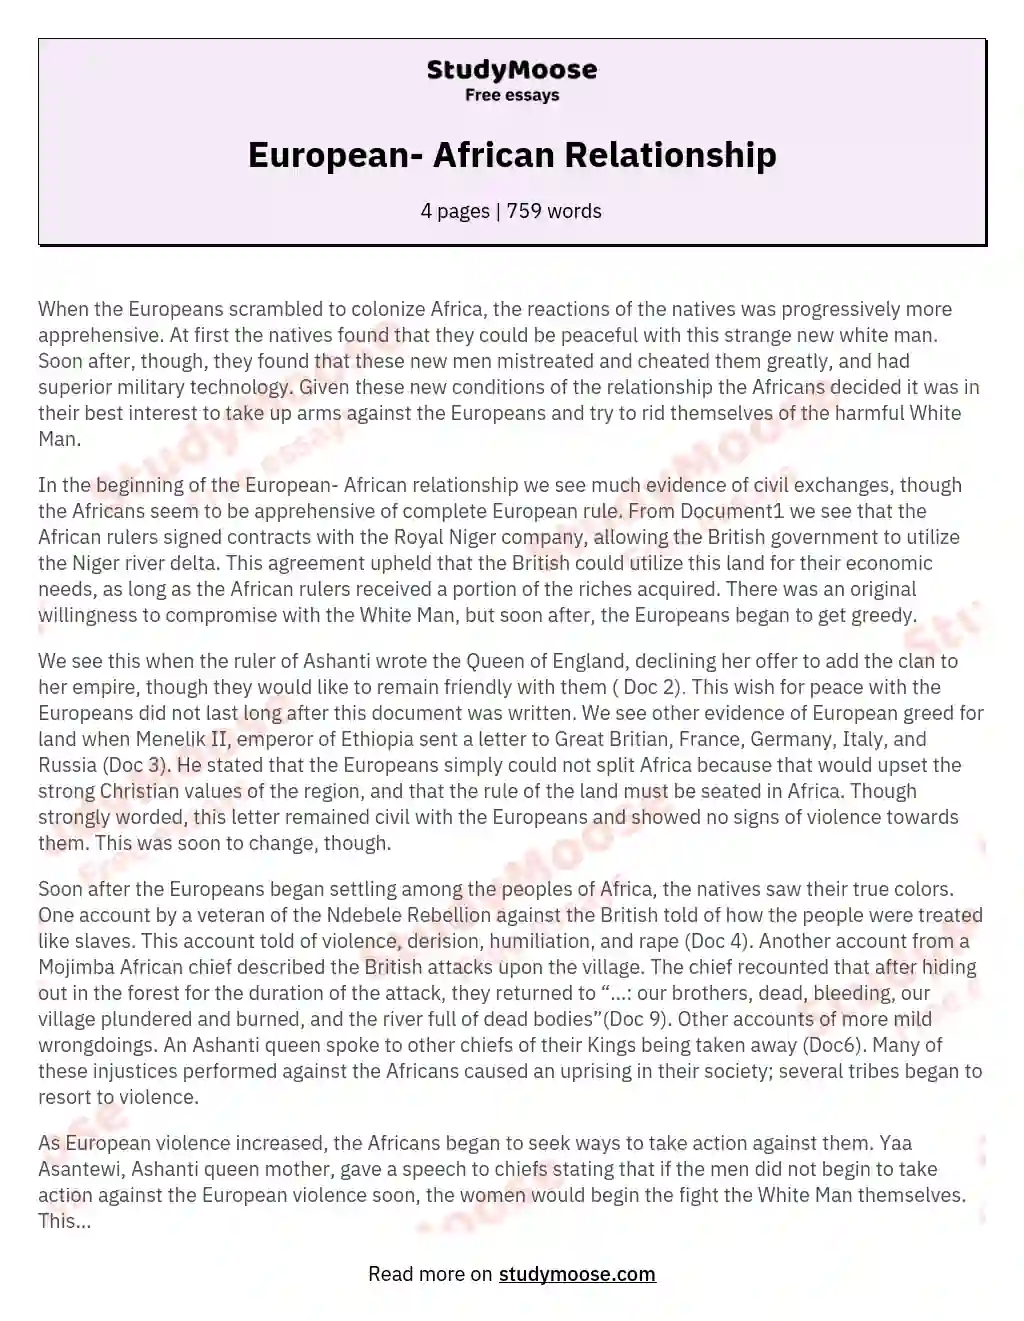 Forging Resilience: The Colonial Encounter between Europeans and Africans essay